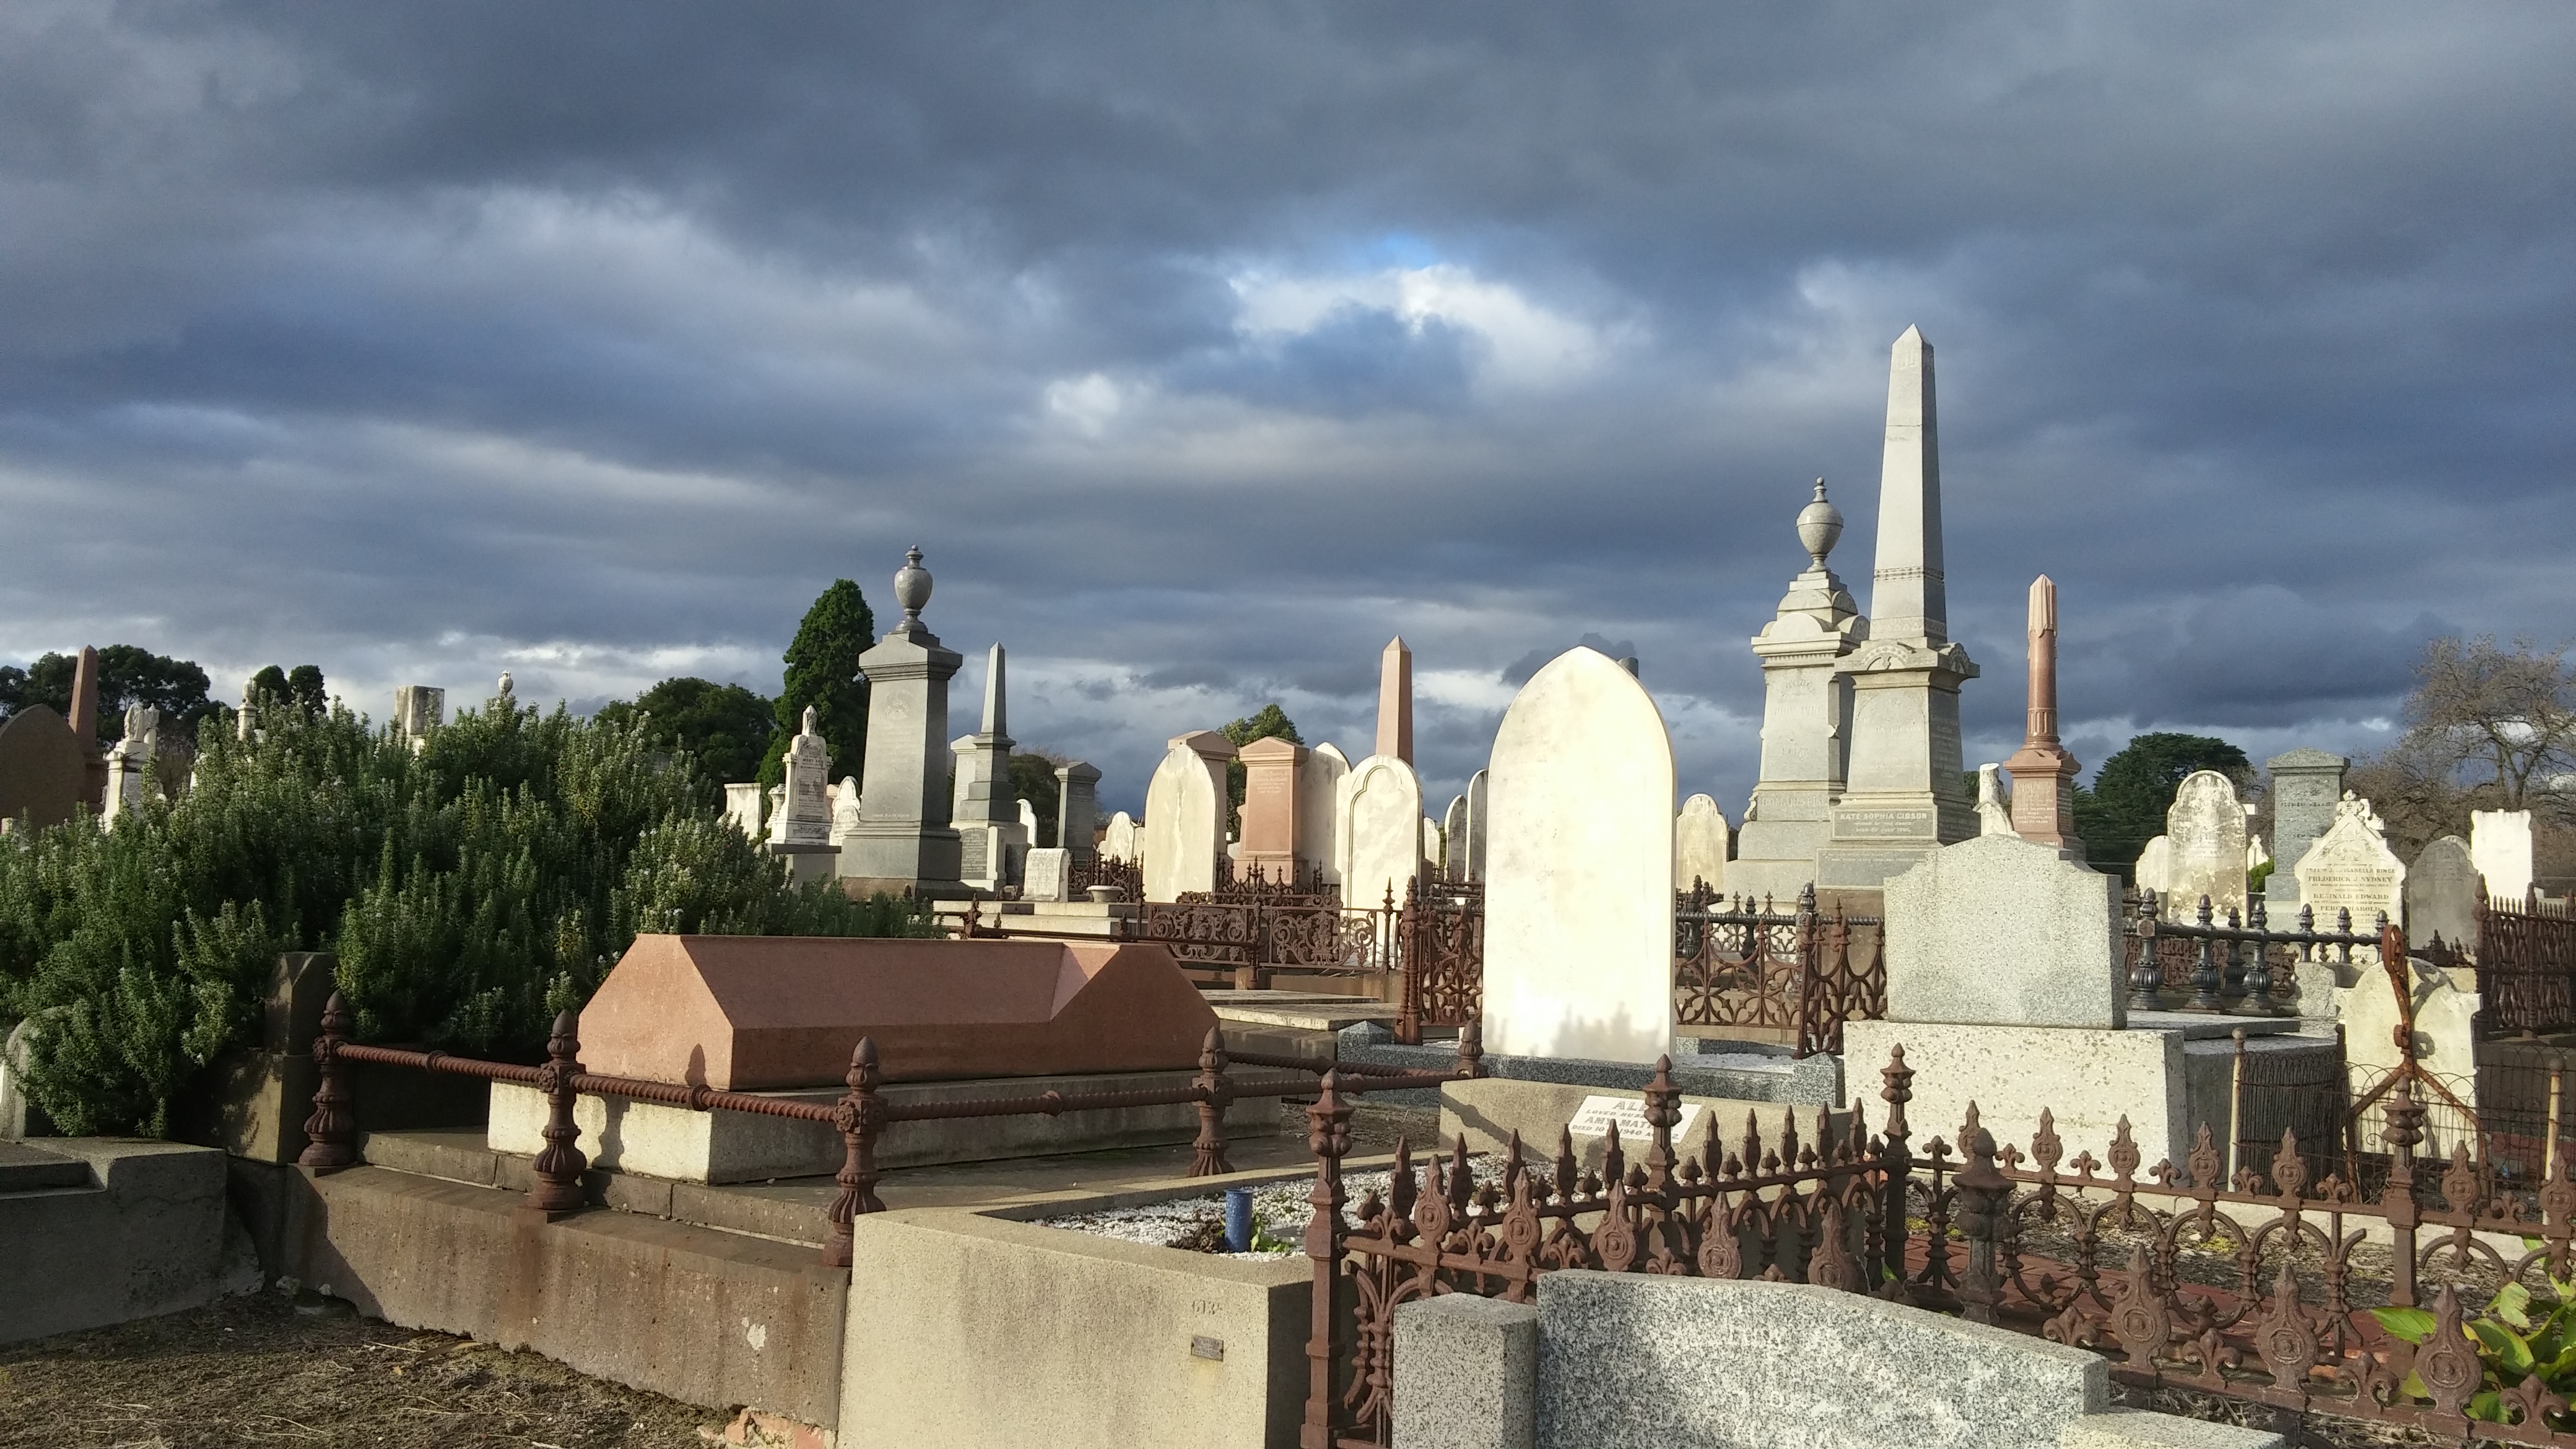 Changing weather over St. Kilda Cemetery, Melbourne Australia